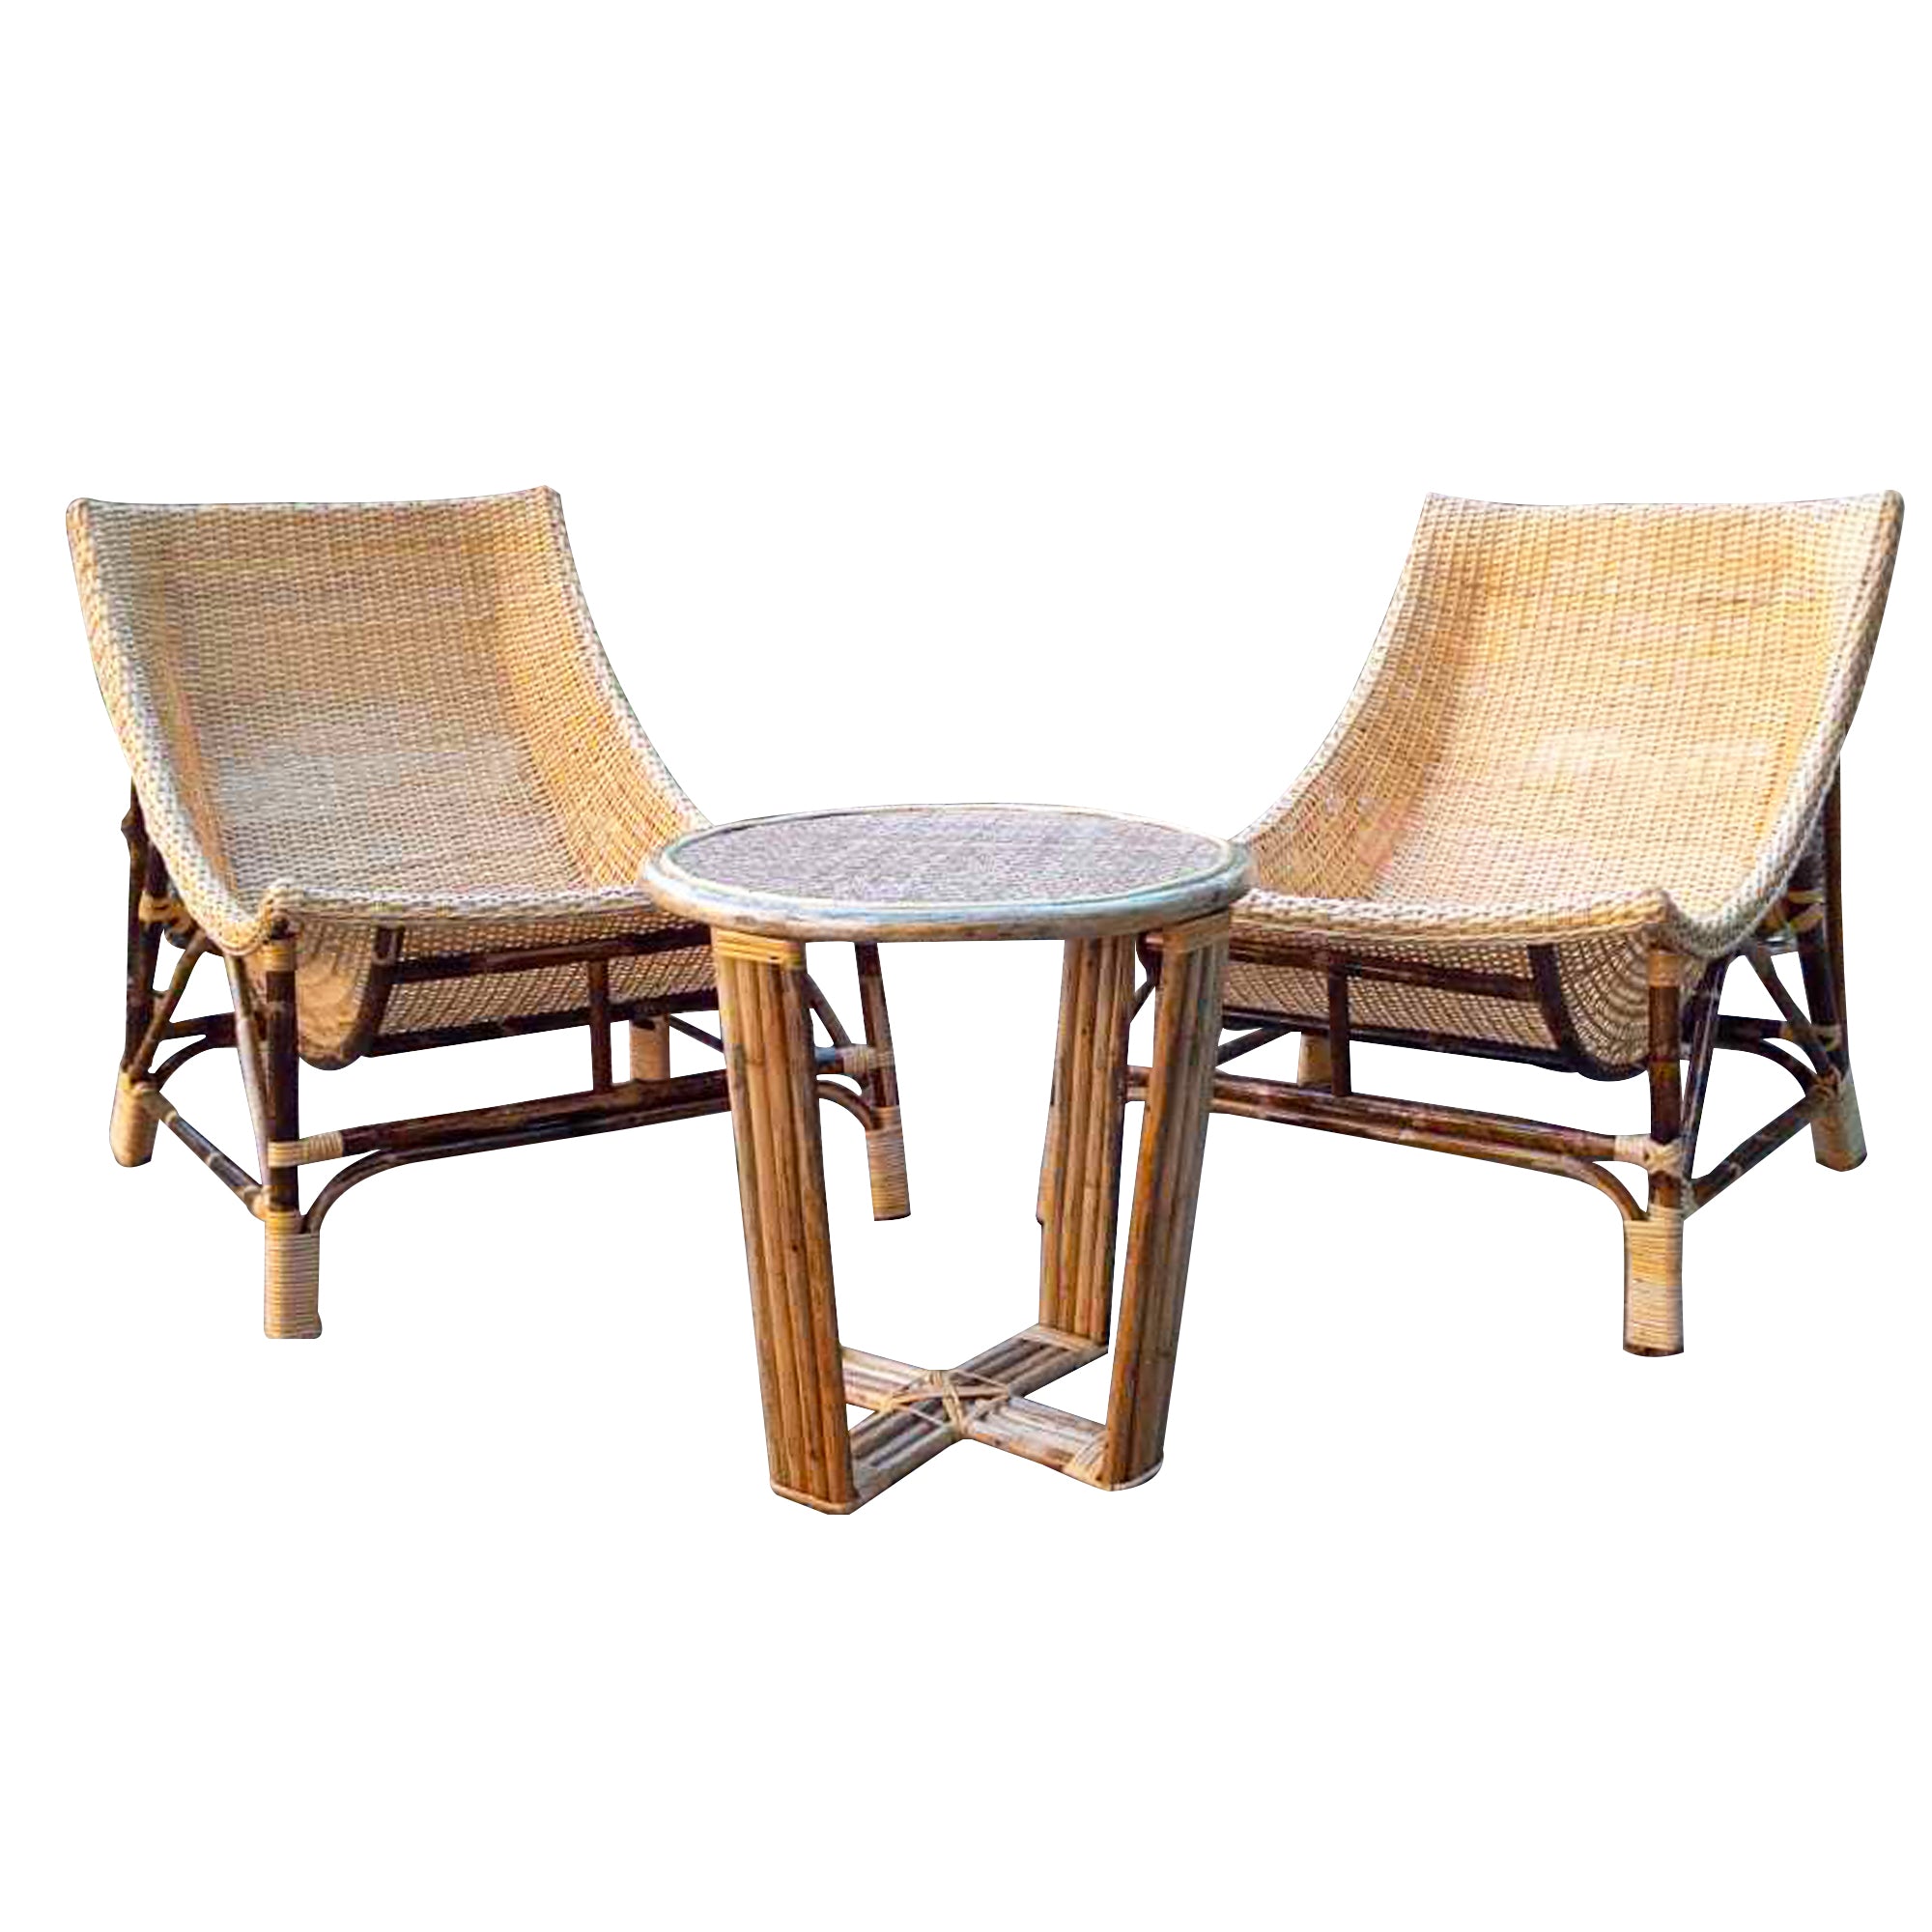 IRA Cane Hammock Chair (Natural) - Two Chair with Center Table